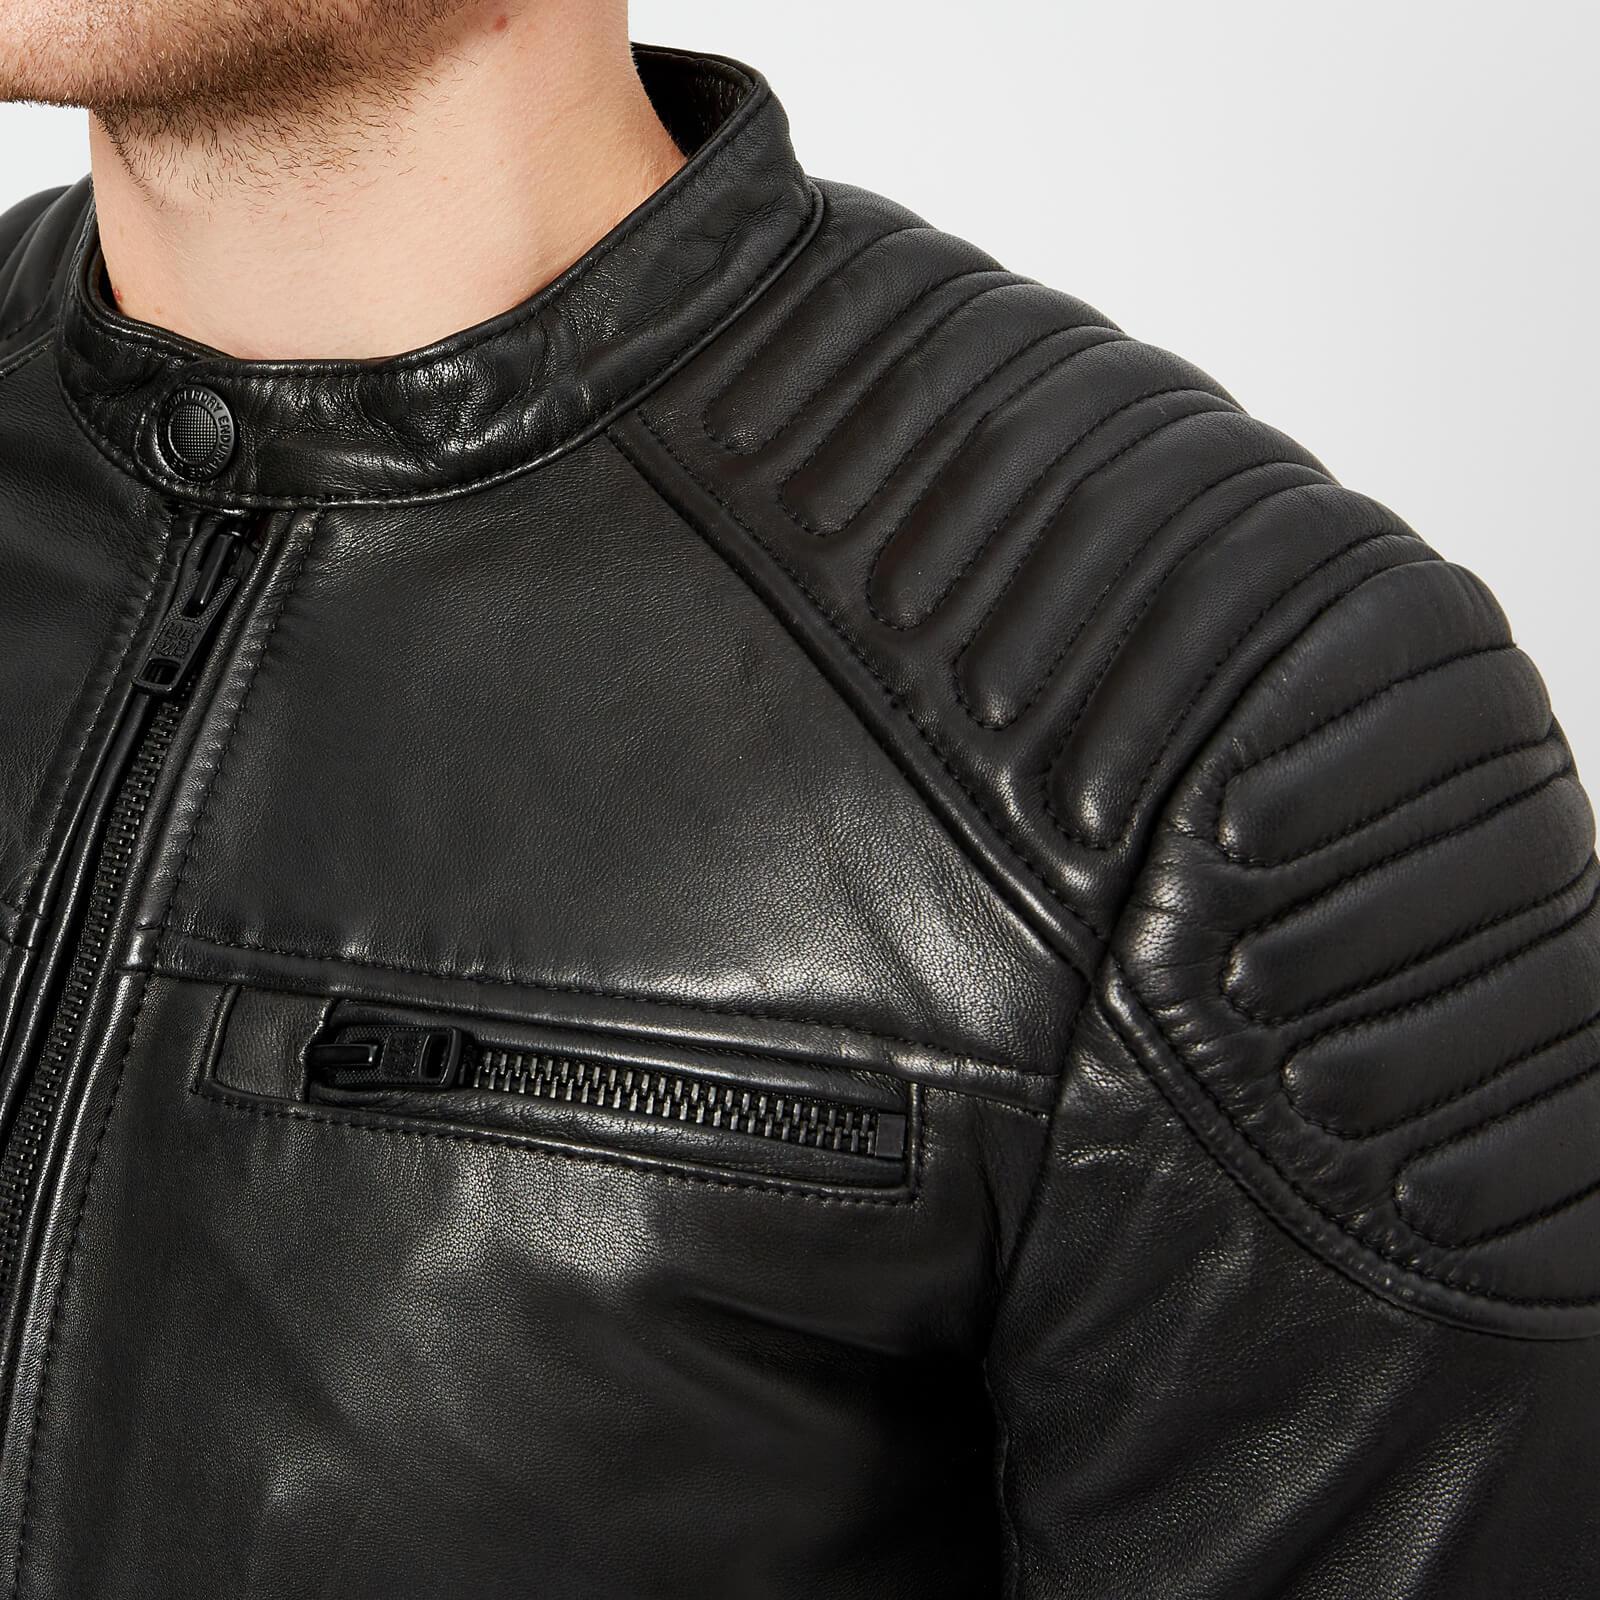 Superdry New Hero Leather Jacket in Black for Men | Lyst Canada